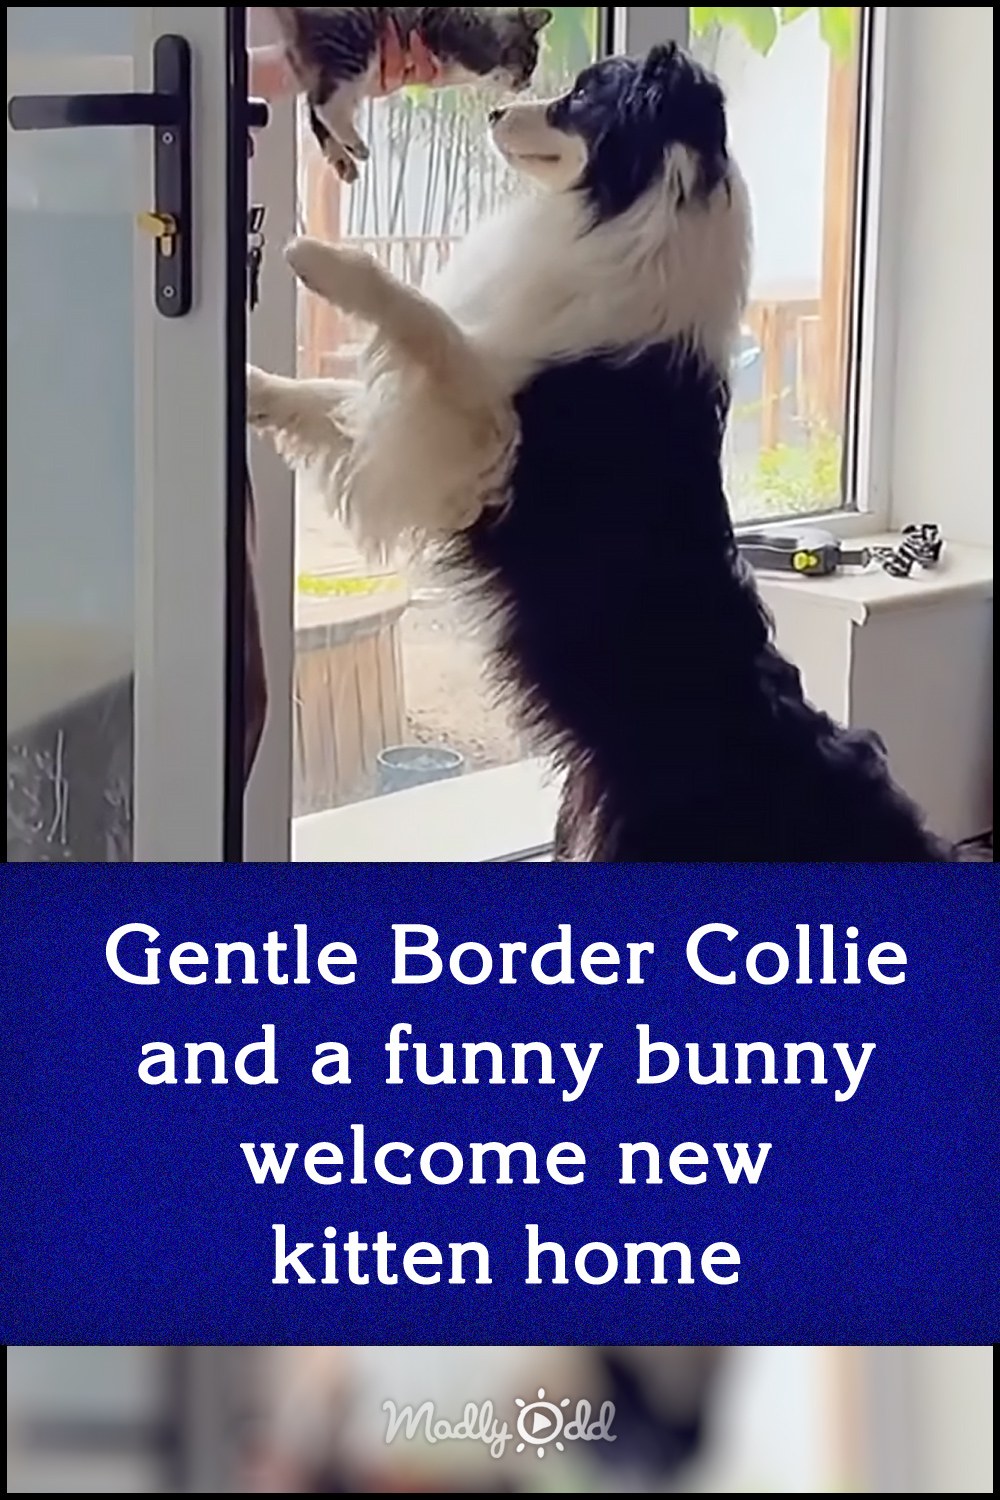 Gentle Border Collie and a funny bunny welcome new kitten home